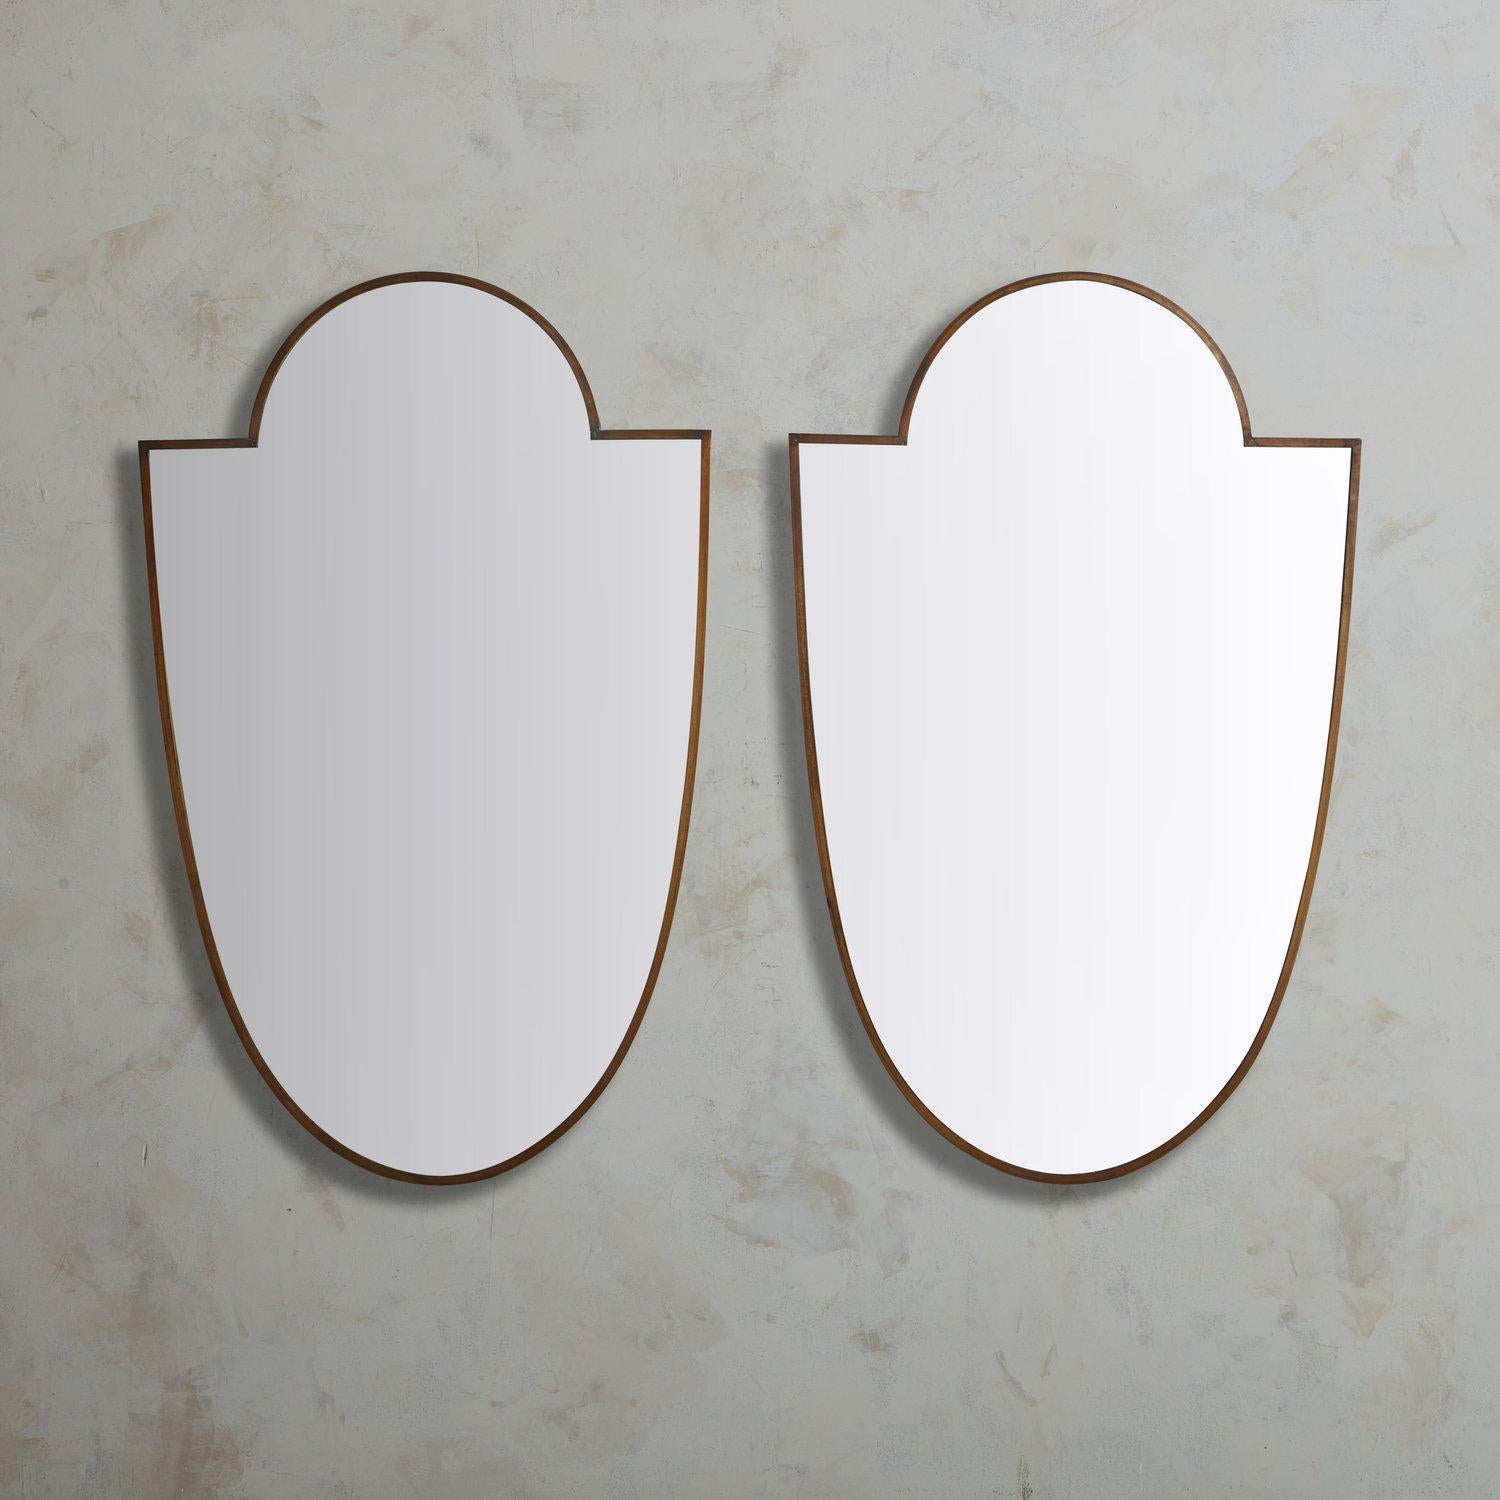 A pair of large scale vintage Italian shield shaped wall mirrors with delicate patinated brass frames. These mirrors have wooden backings and hardware for hanging. Sourced in Italy, 20th Century.

